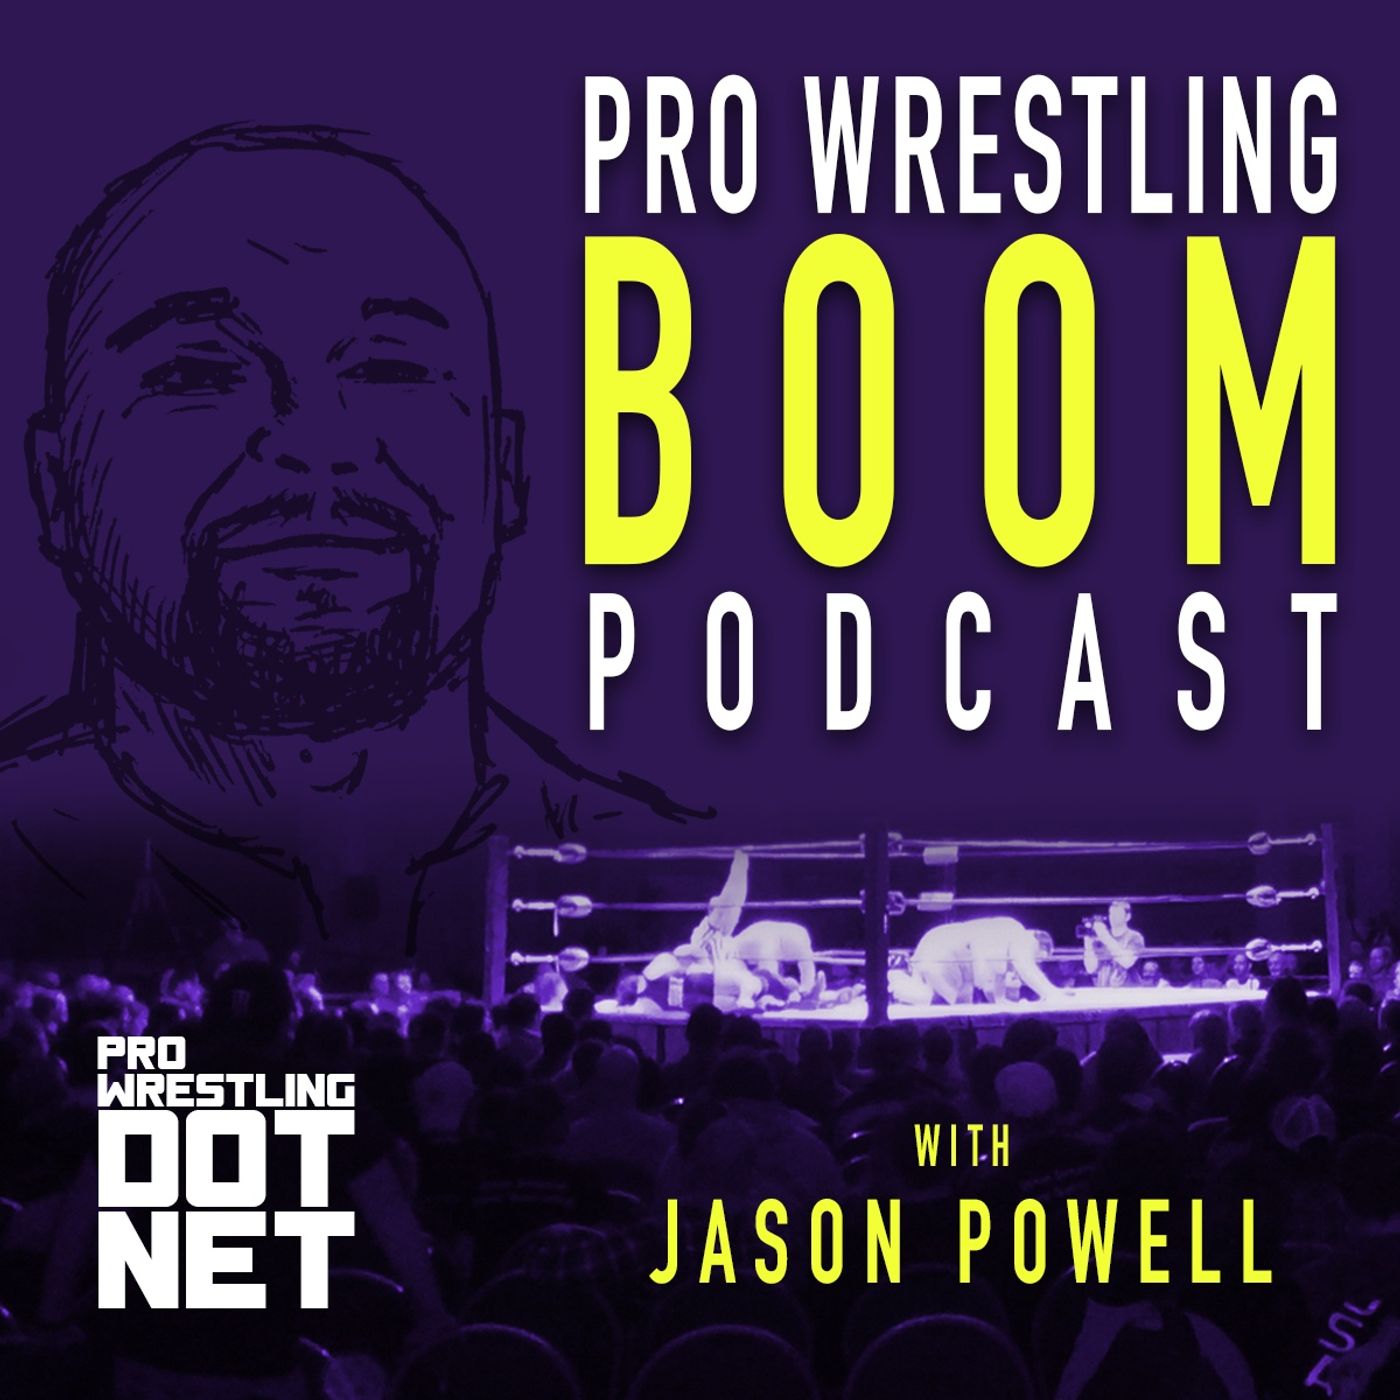 05/03 Pro Wrestling Boom Podcast With Jason Powell (Episode 307): Jake Barnett co-hosts the Dot Net Weekly combo show 